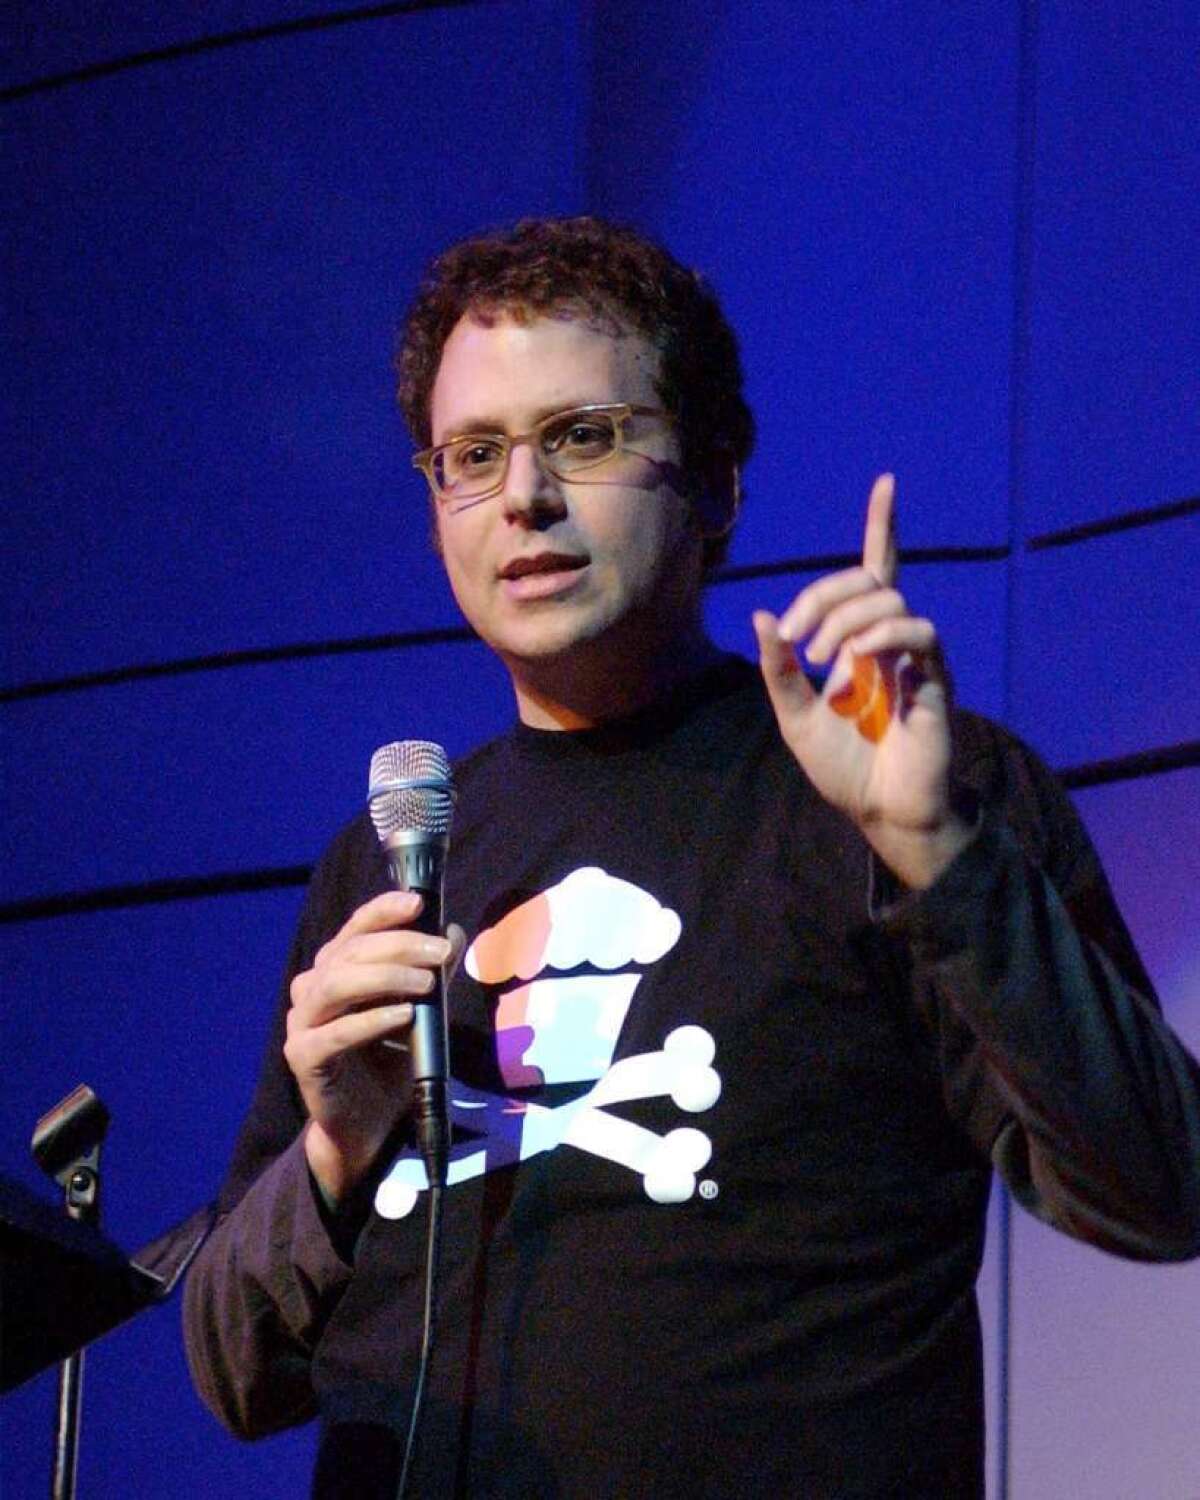 This week, the California Supreme Court will conduct a hearing on granting serial fabricator Stephen Glass a license to practice law in the state. Above, Glass is seen performing in Los Angeles in 2007.